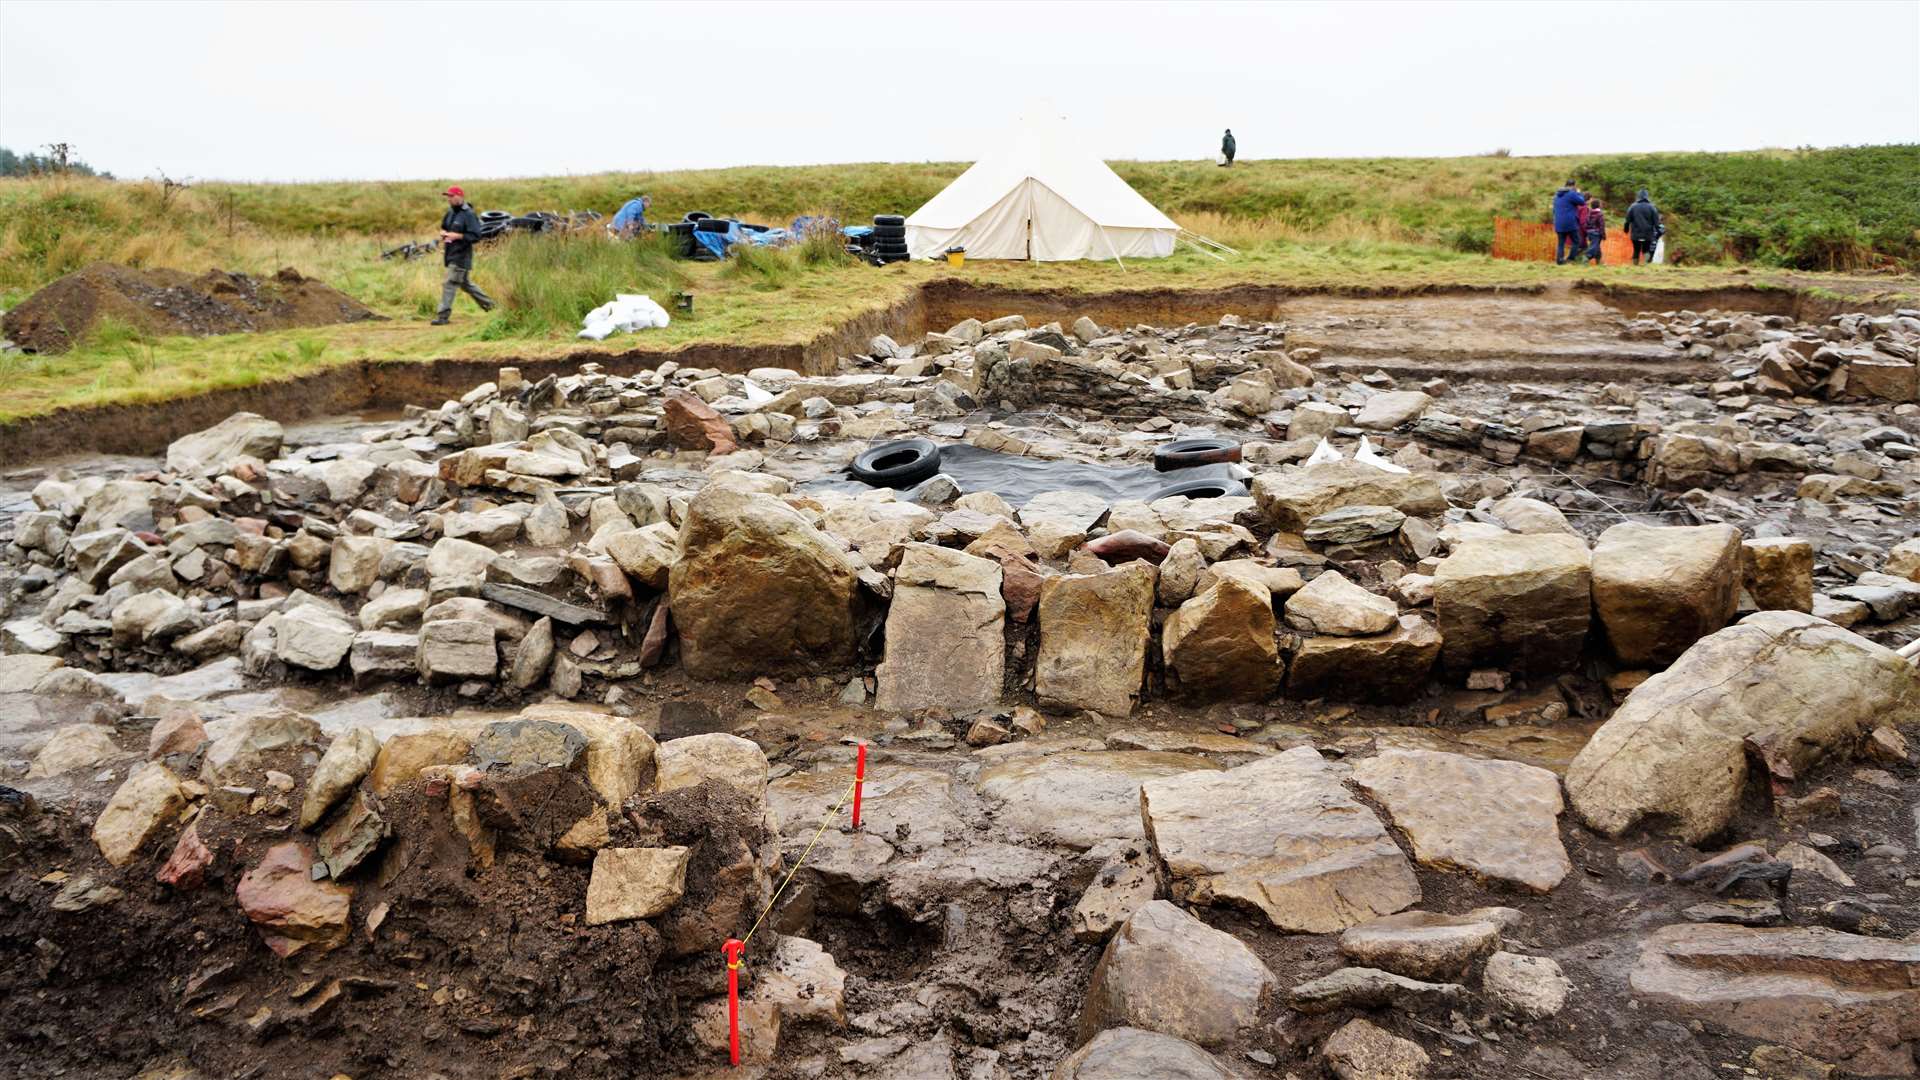 The archaeological dig at Swartigill previously benefited from wind farm funding. Picture: DGS